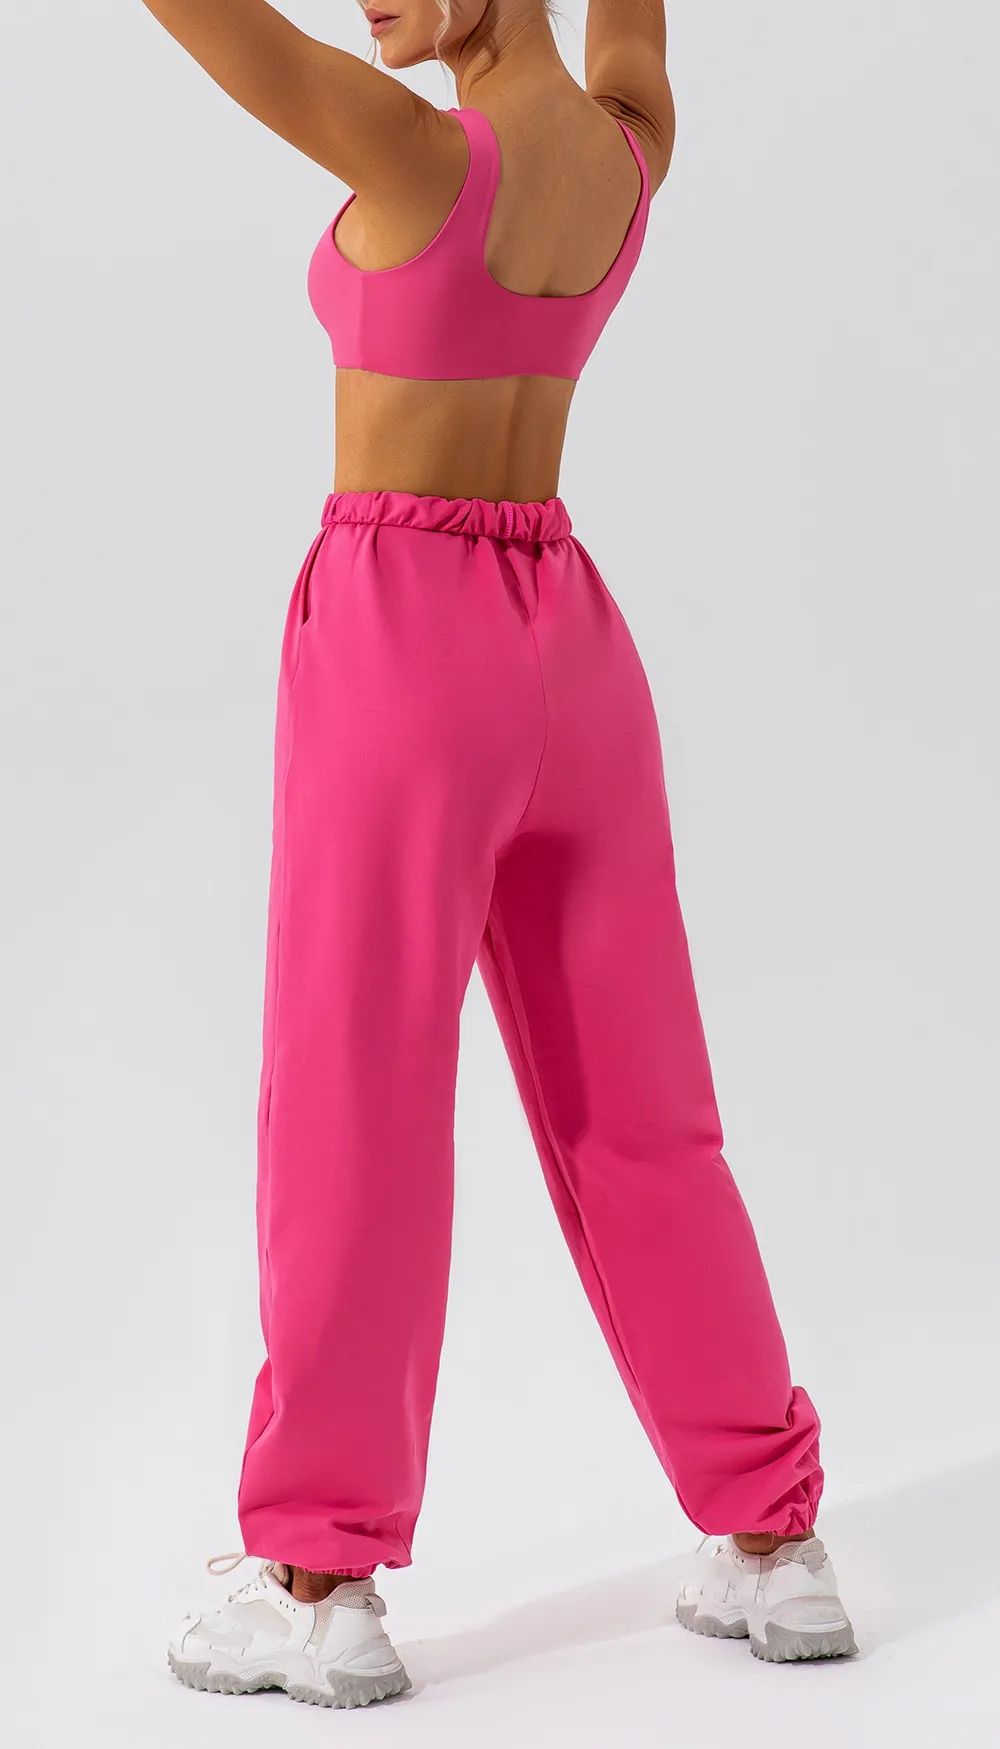 AL-0055 Yoga Suit Hot Pink Sets Women Gym Fitness Bras With Leggings And Belted Sweatpants Female Wear Running Clothing Tracksuit Sportswear